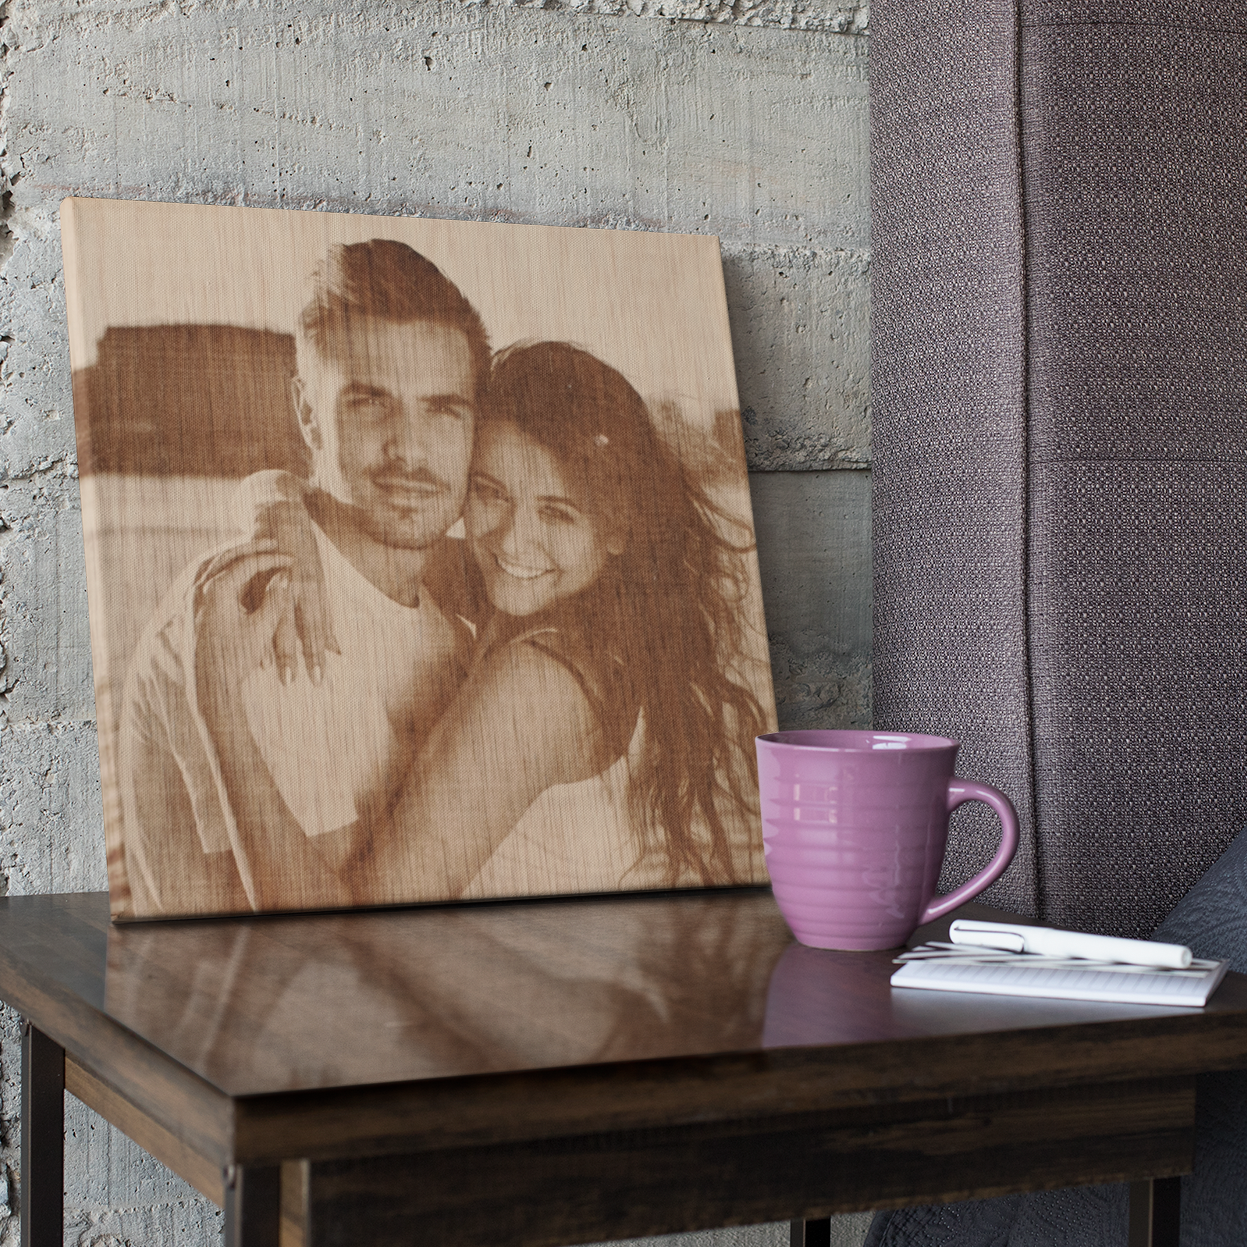 Custom Photo on Wood - Personalized Wooden Pictures - Rustic Home Decor and Unique Gift Ideas